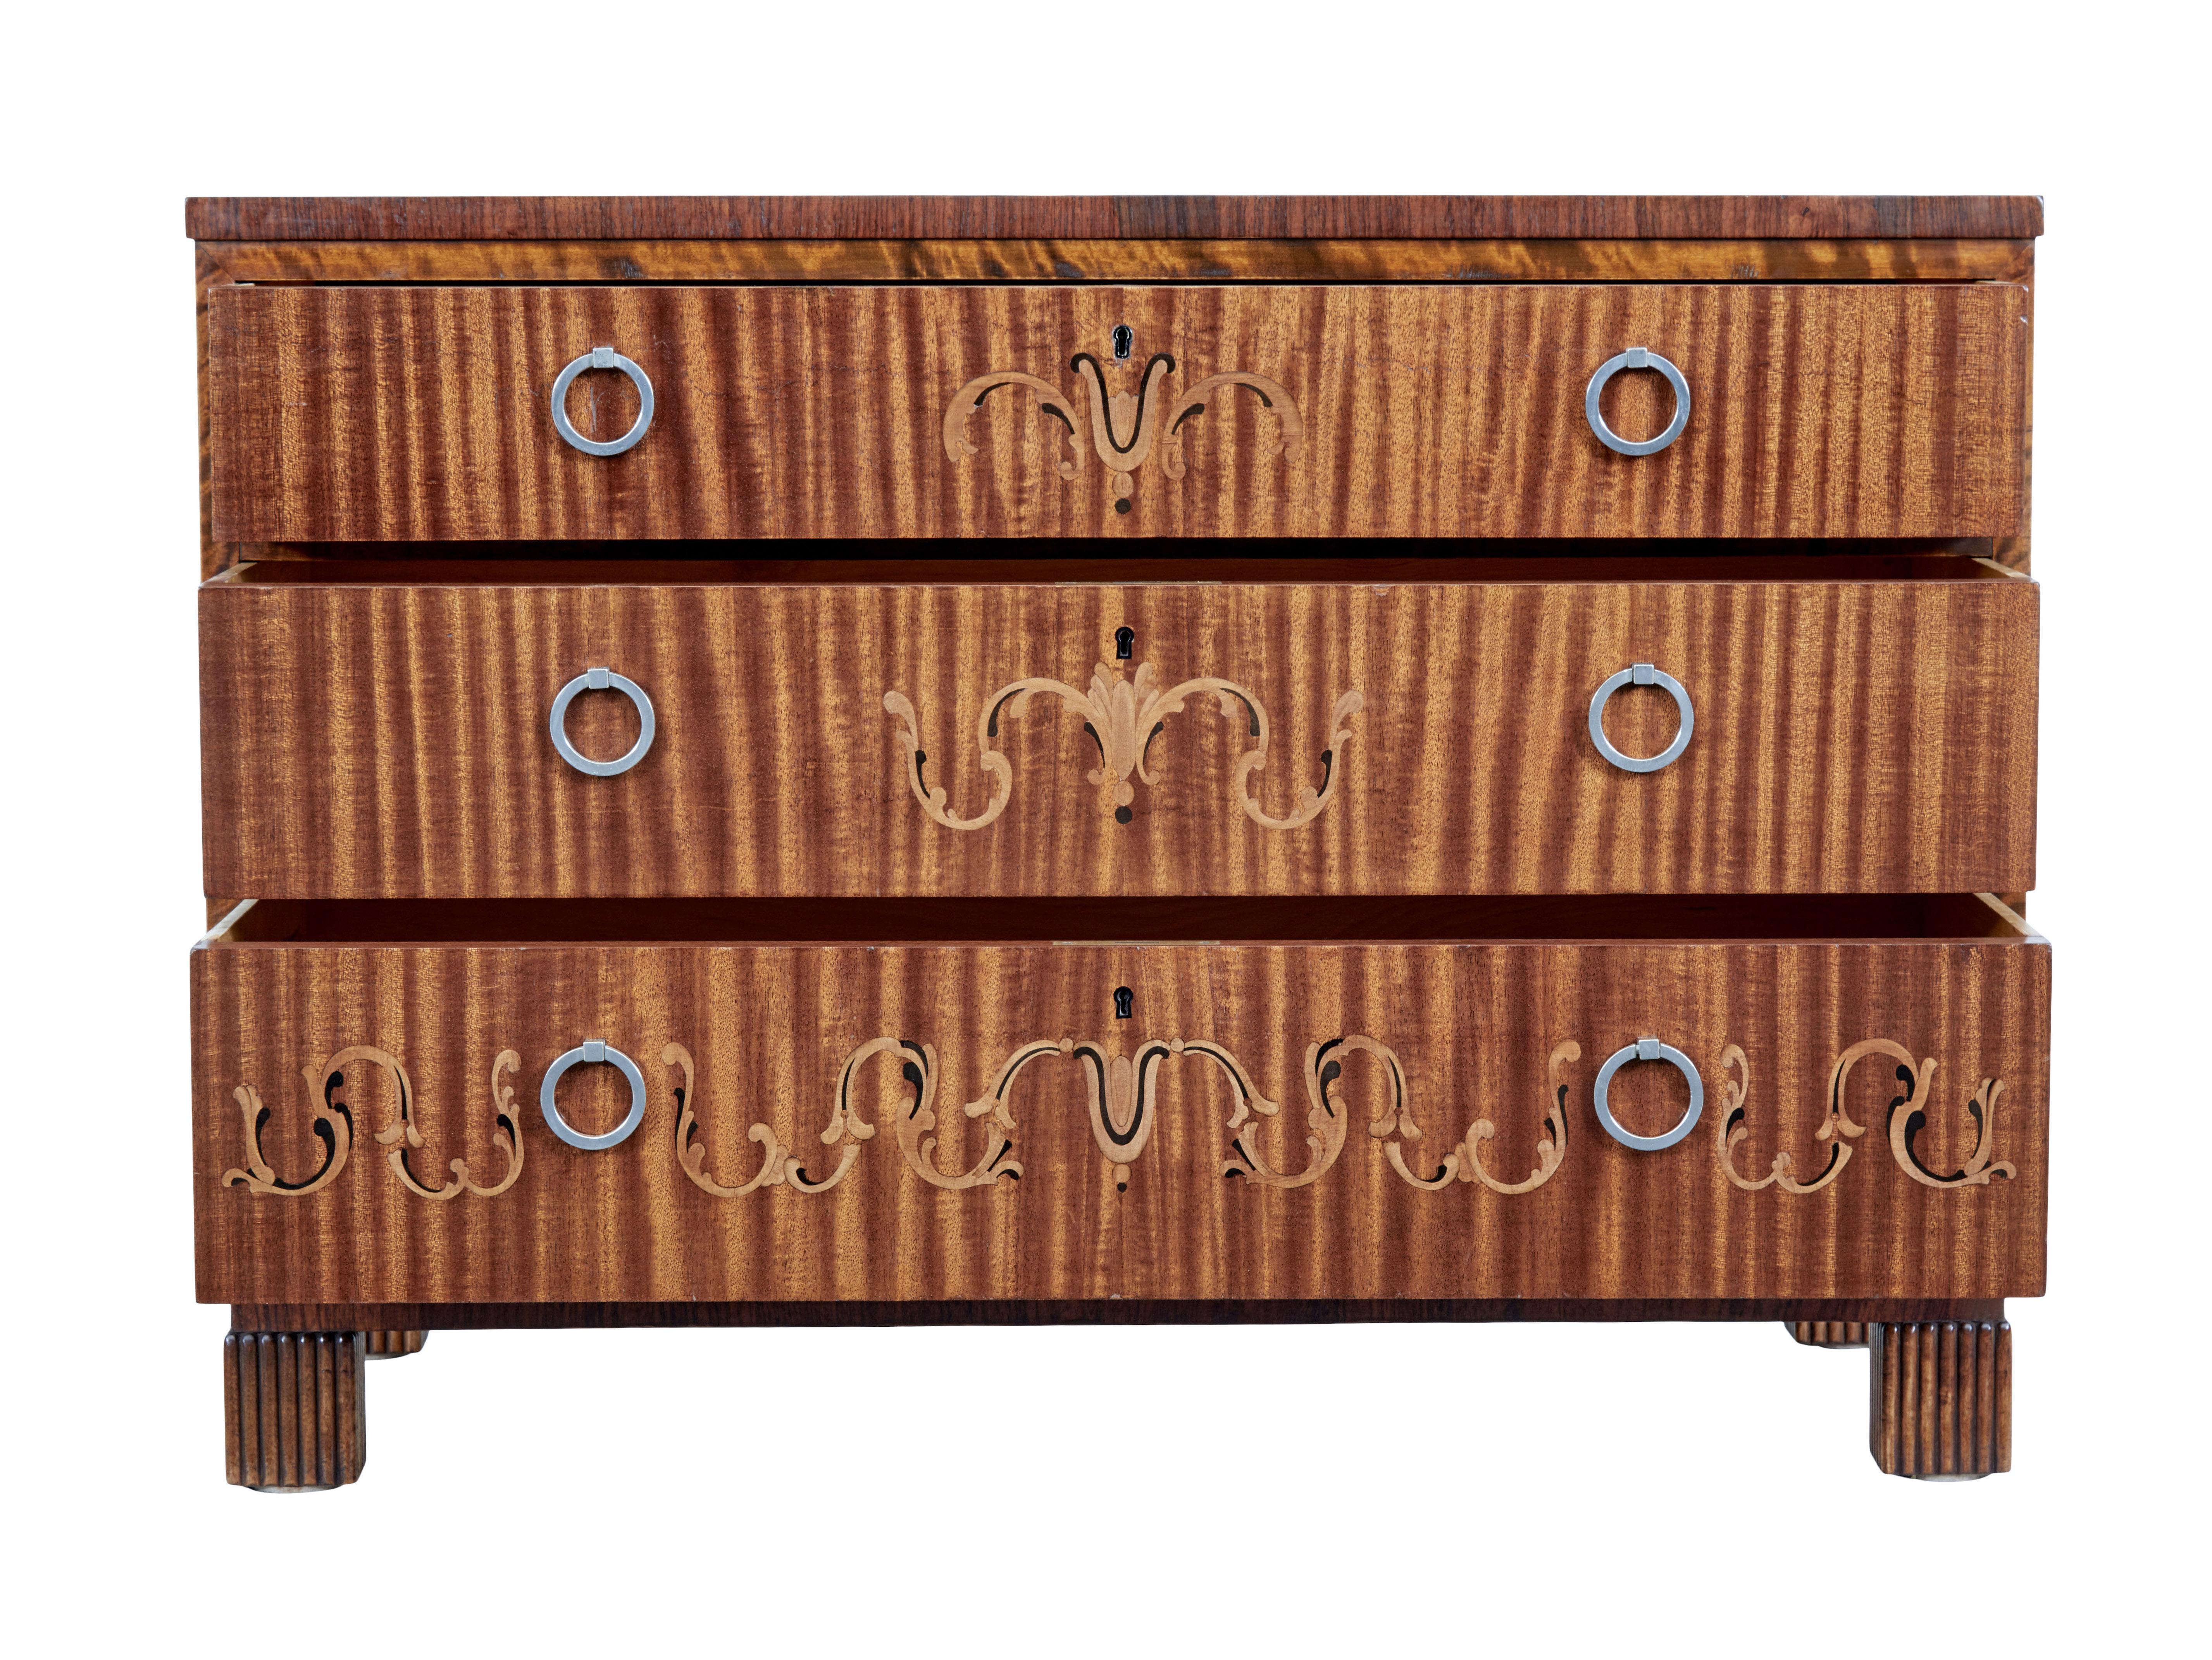 Swedish 20th Century Art Deco Inlaid Chest of Drawers For Sale